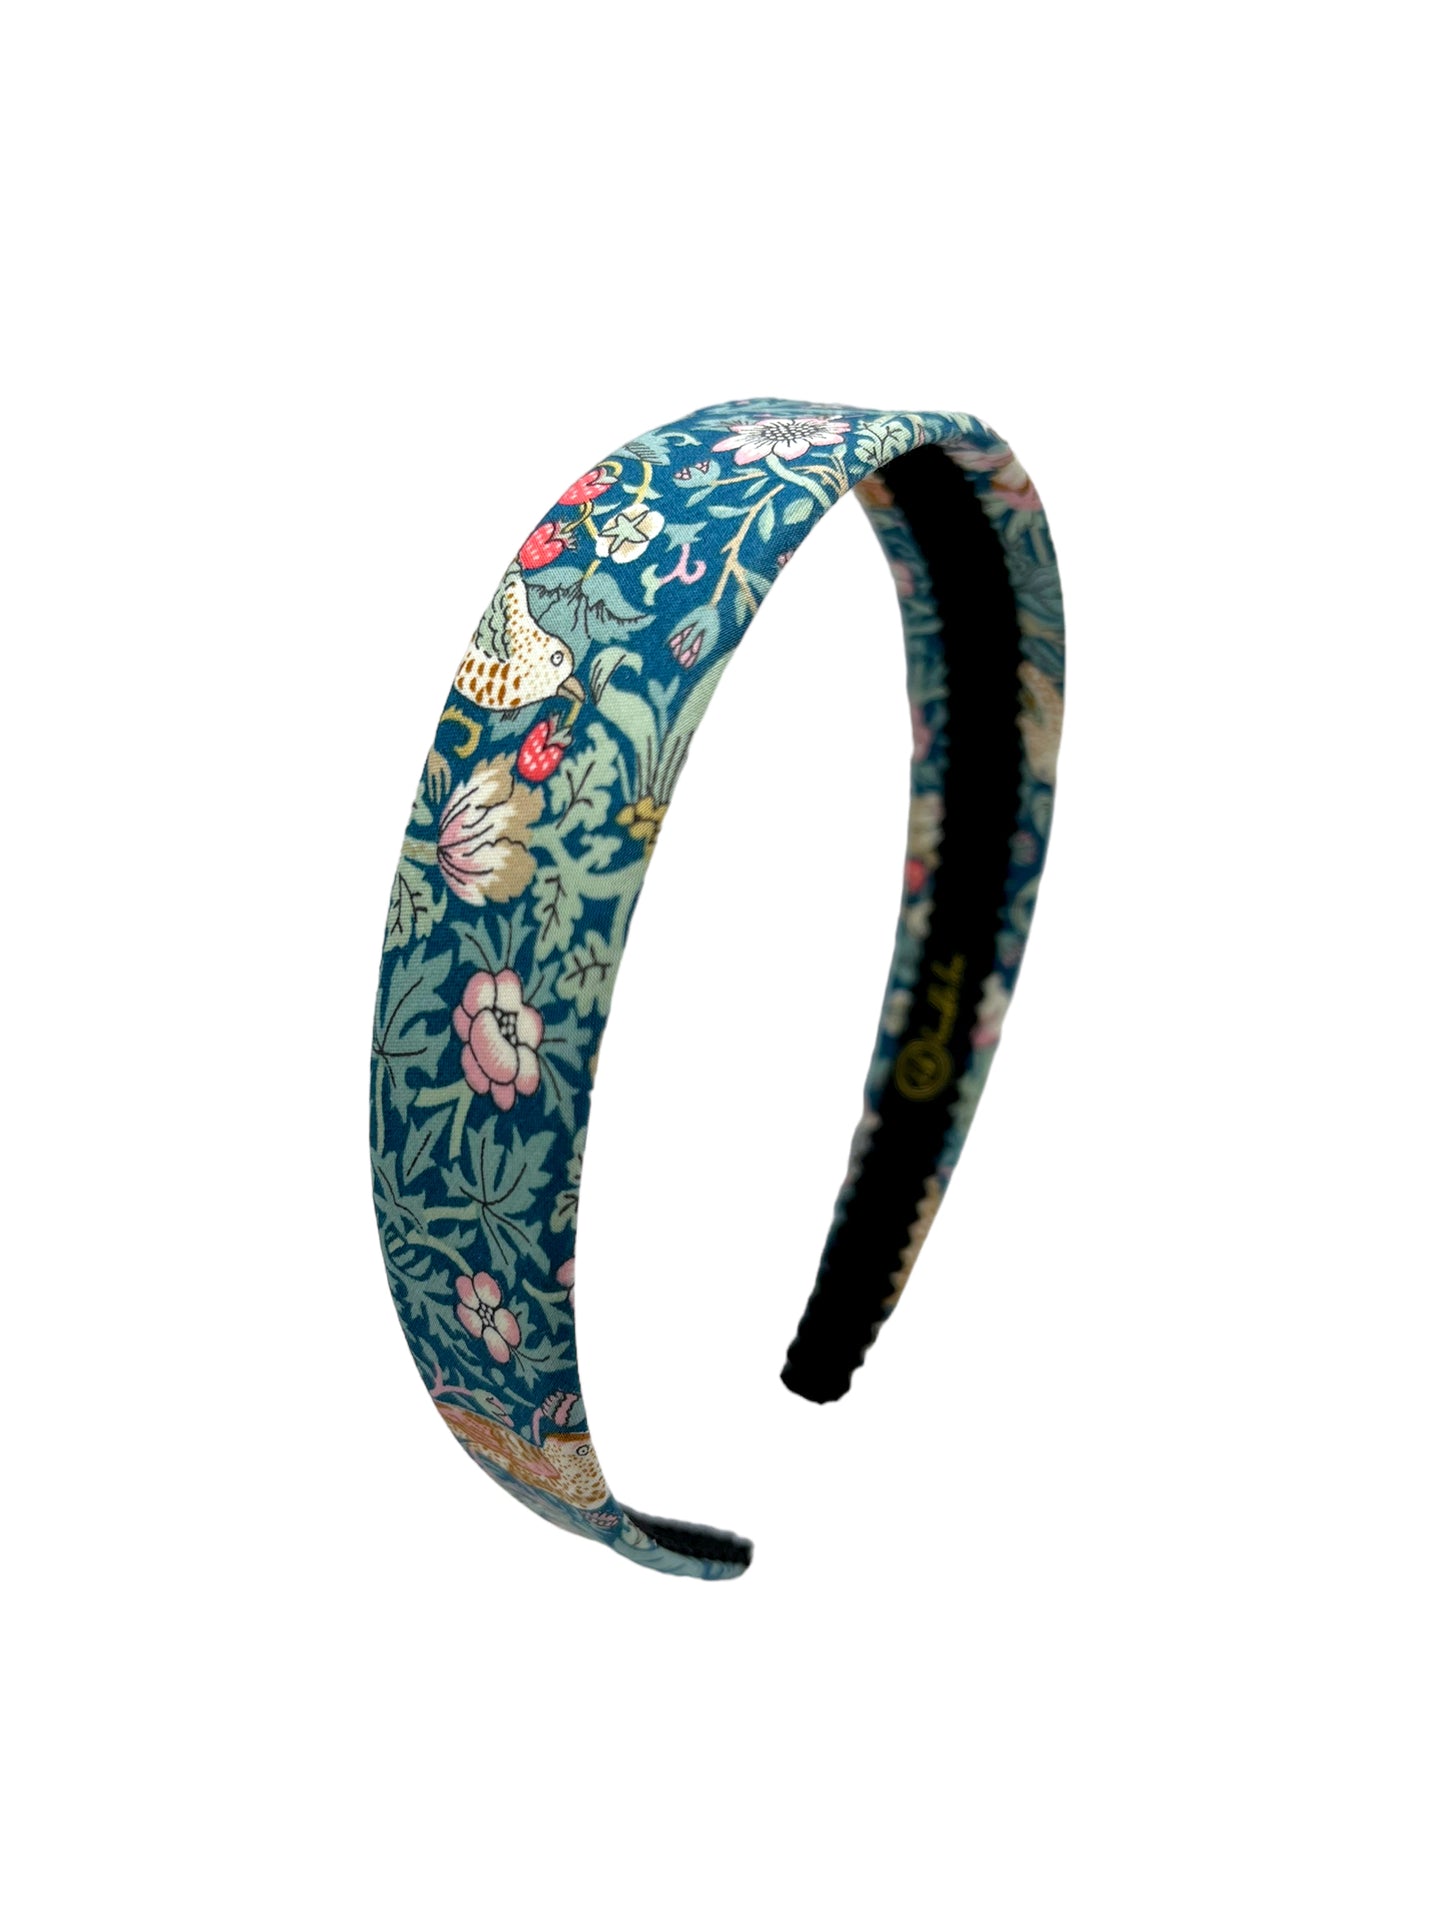 Classic Hairband - Liberty Strawberry Thief Teal